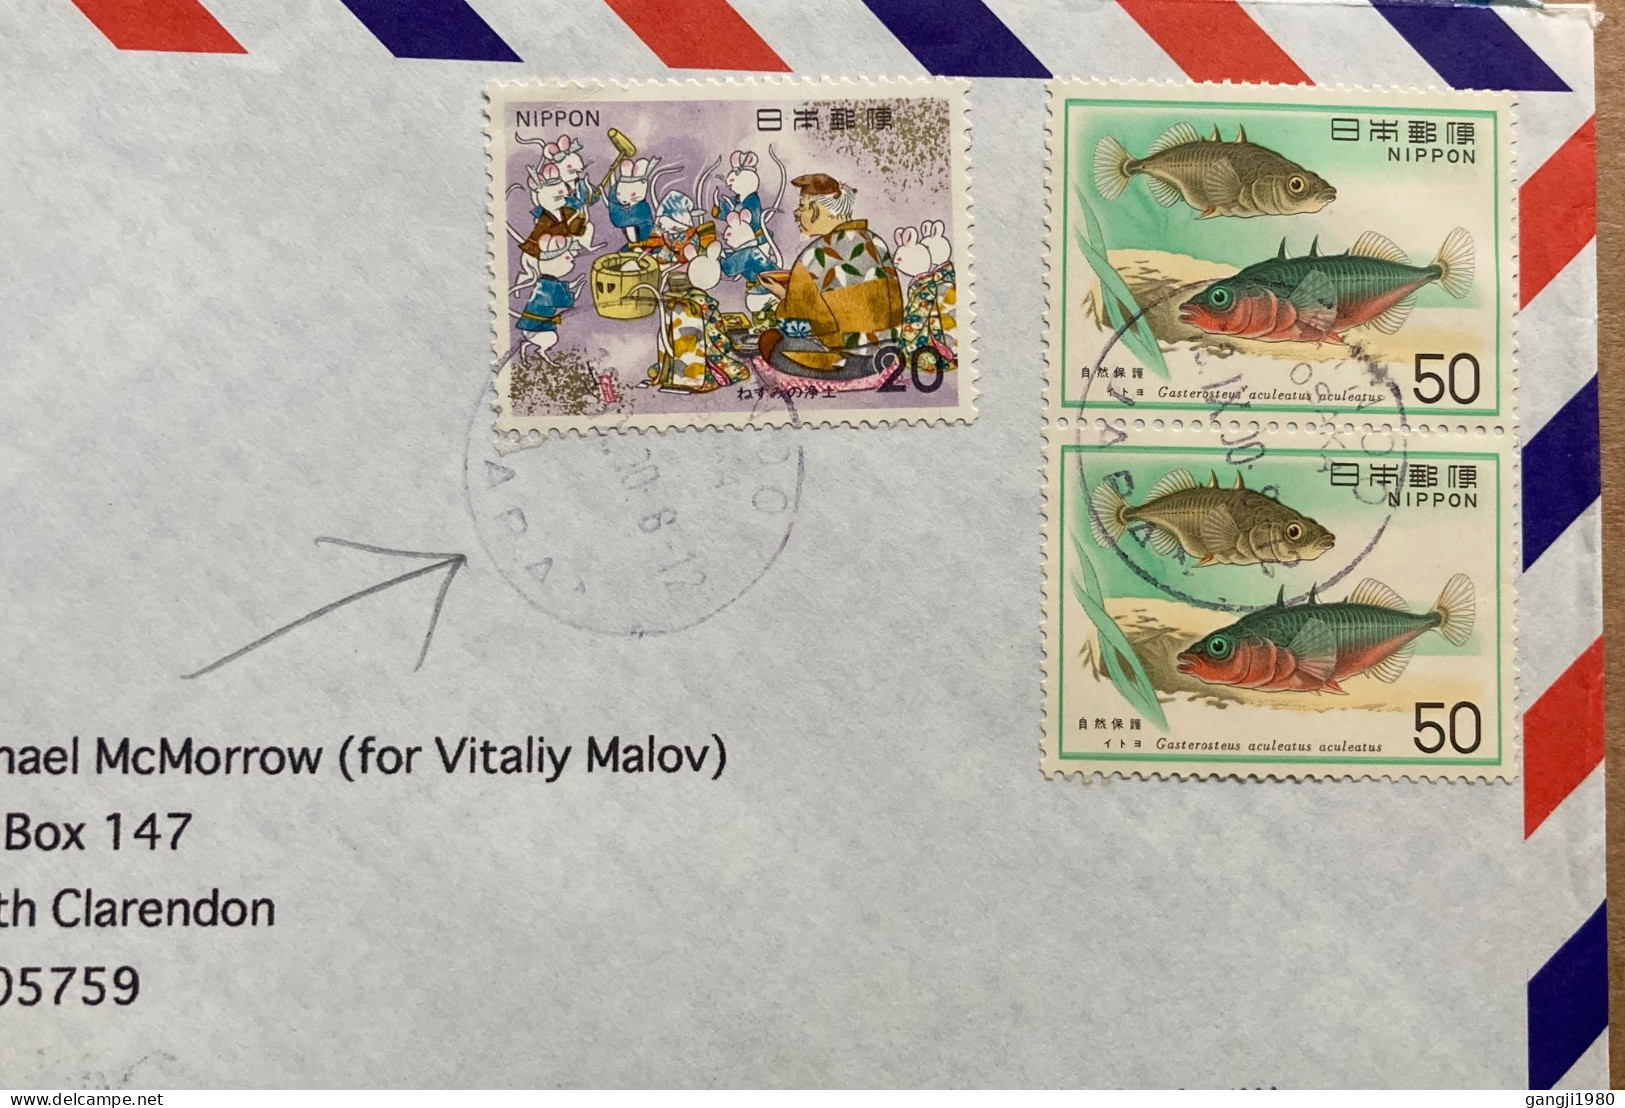 JAPAN 1980, COVER USED TO USA, DISNEY, MICKY MOUSE, FAIRY TALE, CHILDREN STORIES, FISH, 3 STAMP, MINO CITY CANCEL. - Storia Postale